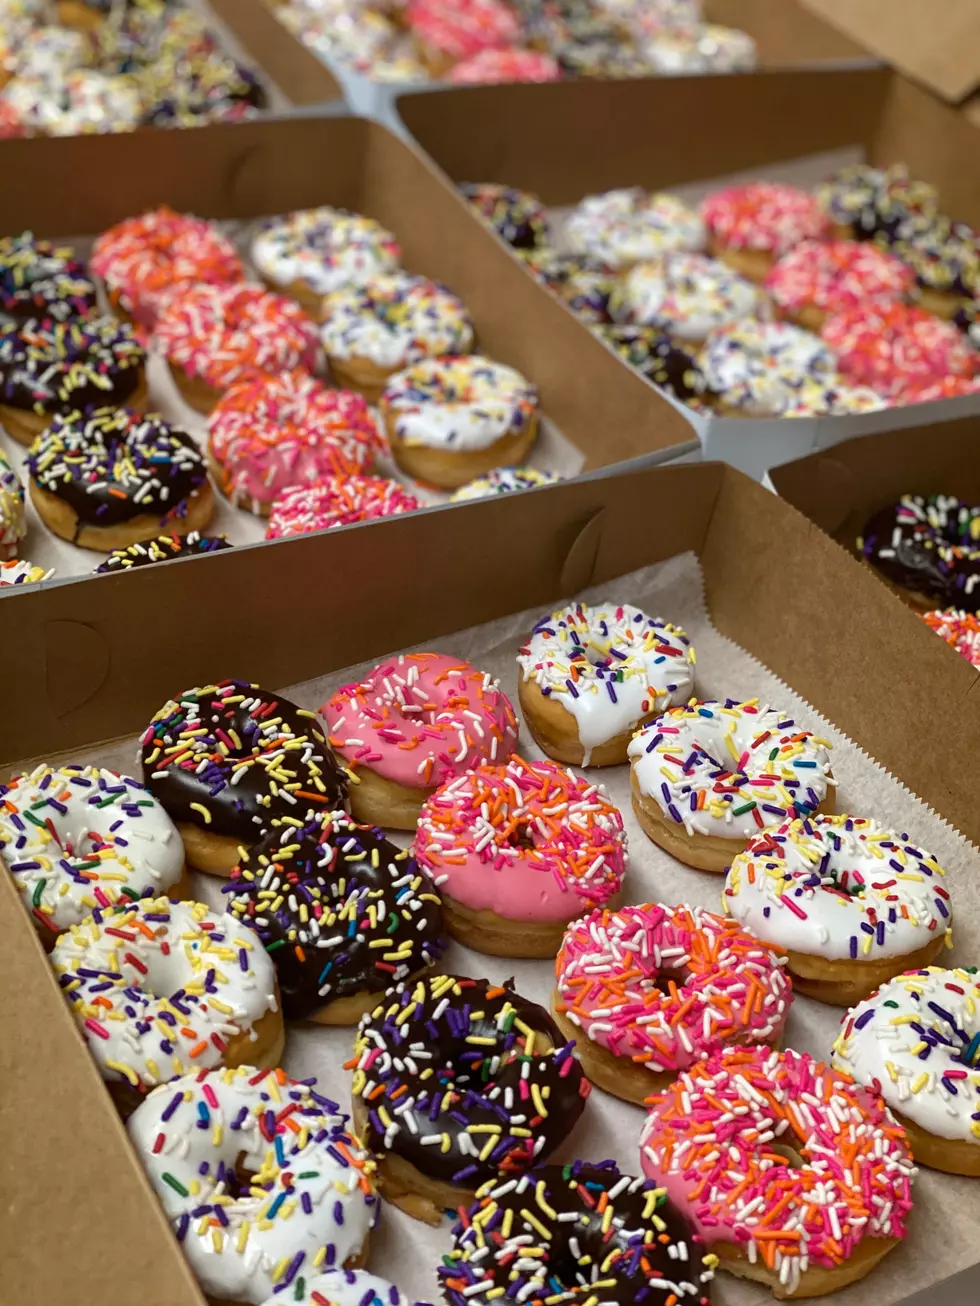 The Best Fresh Donuts in New Jersey